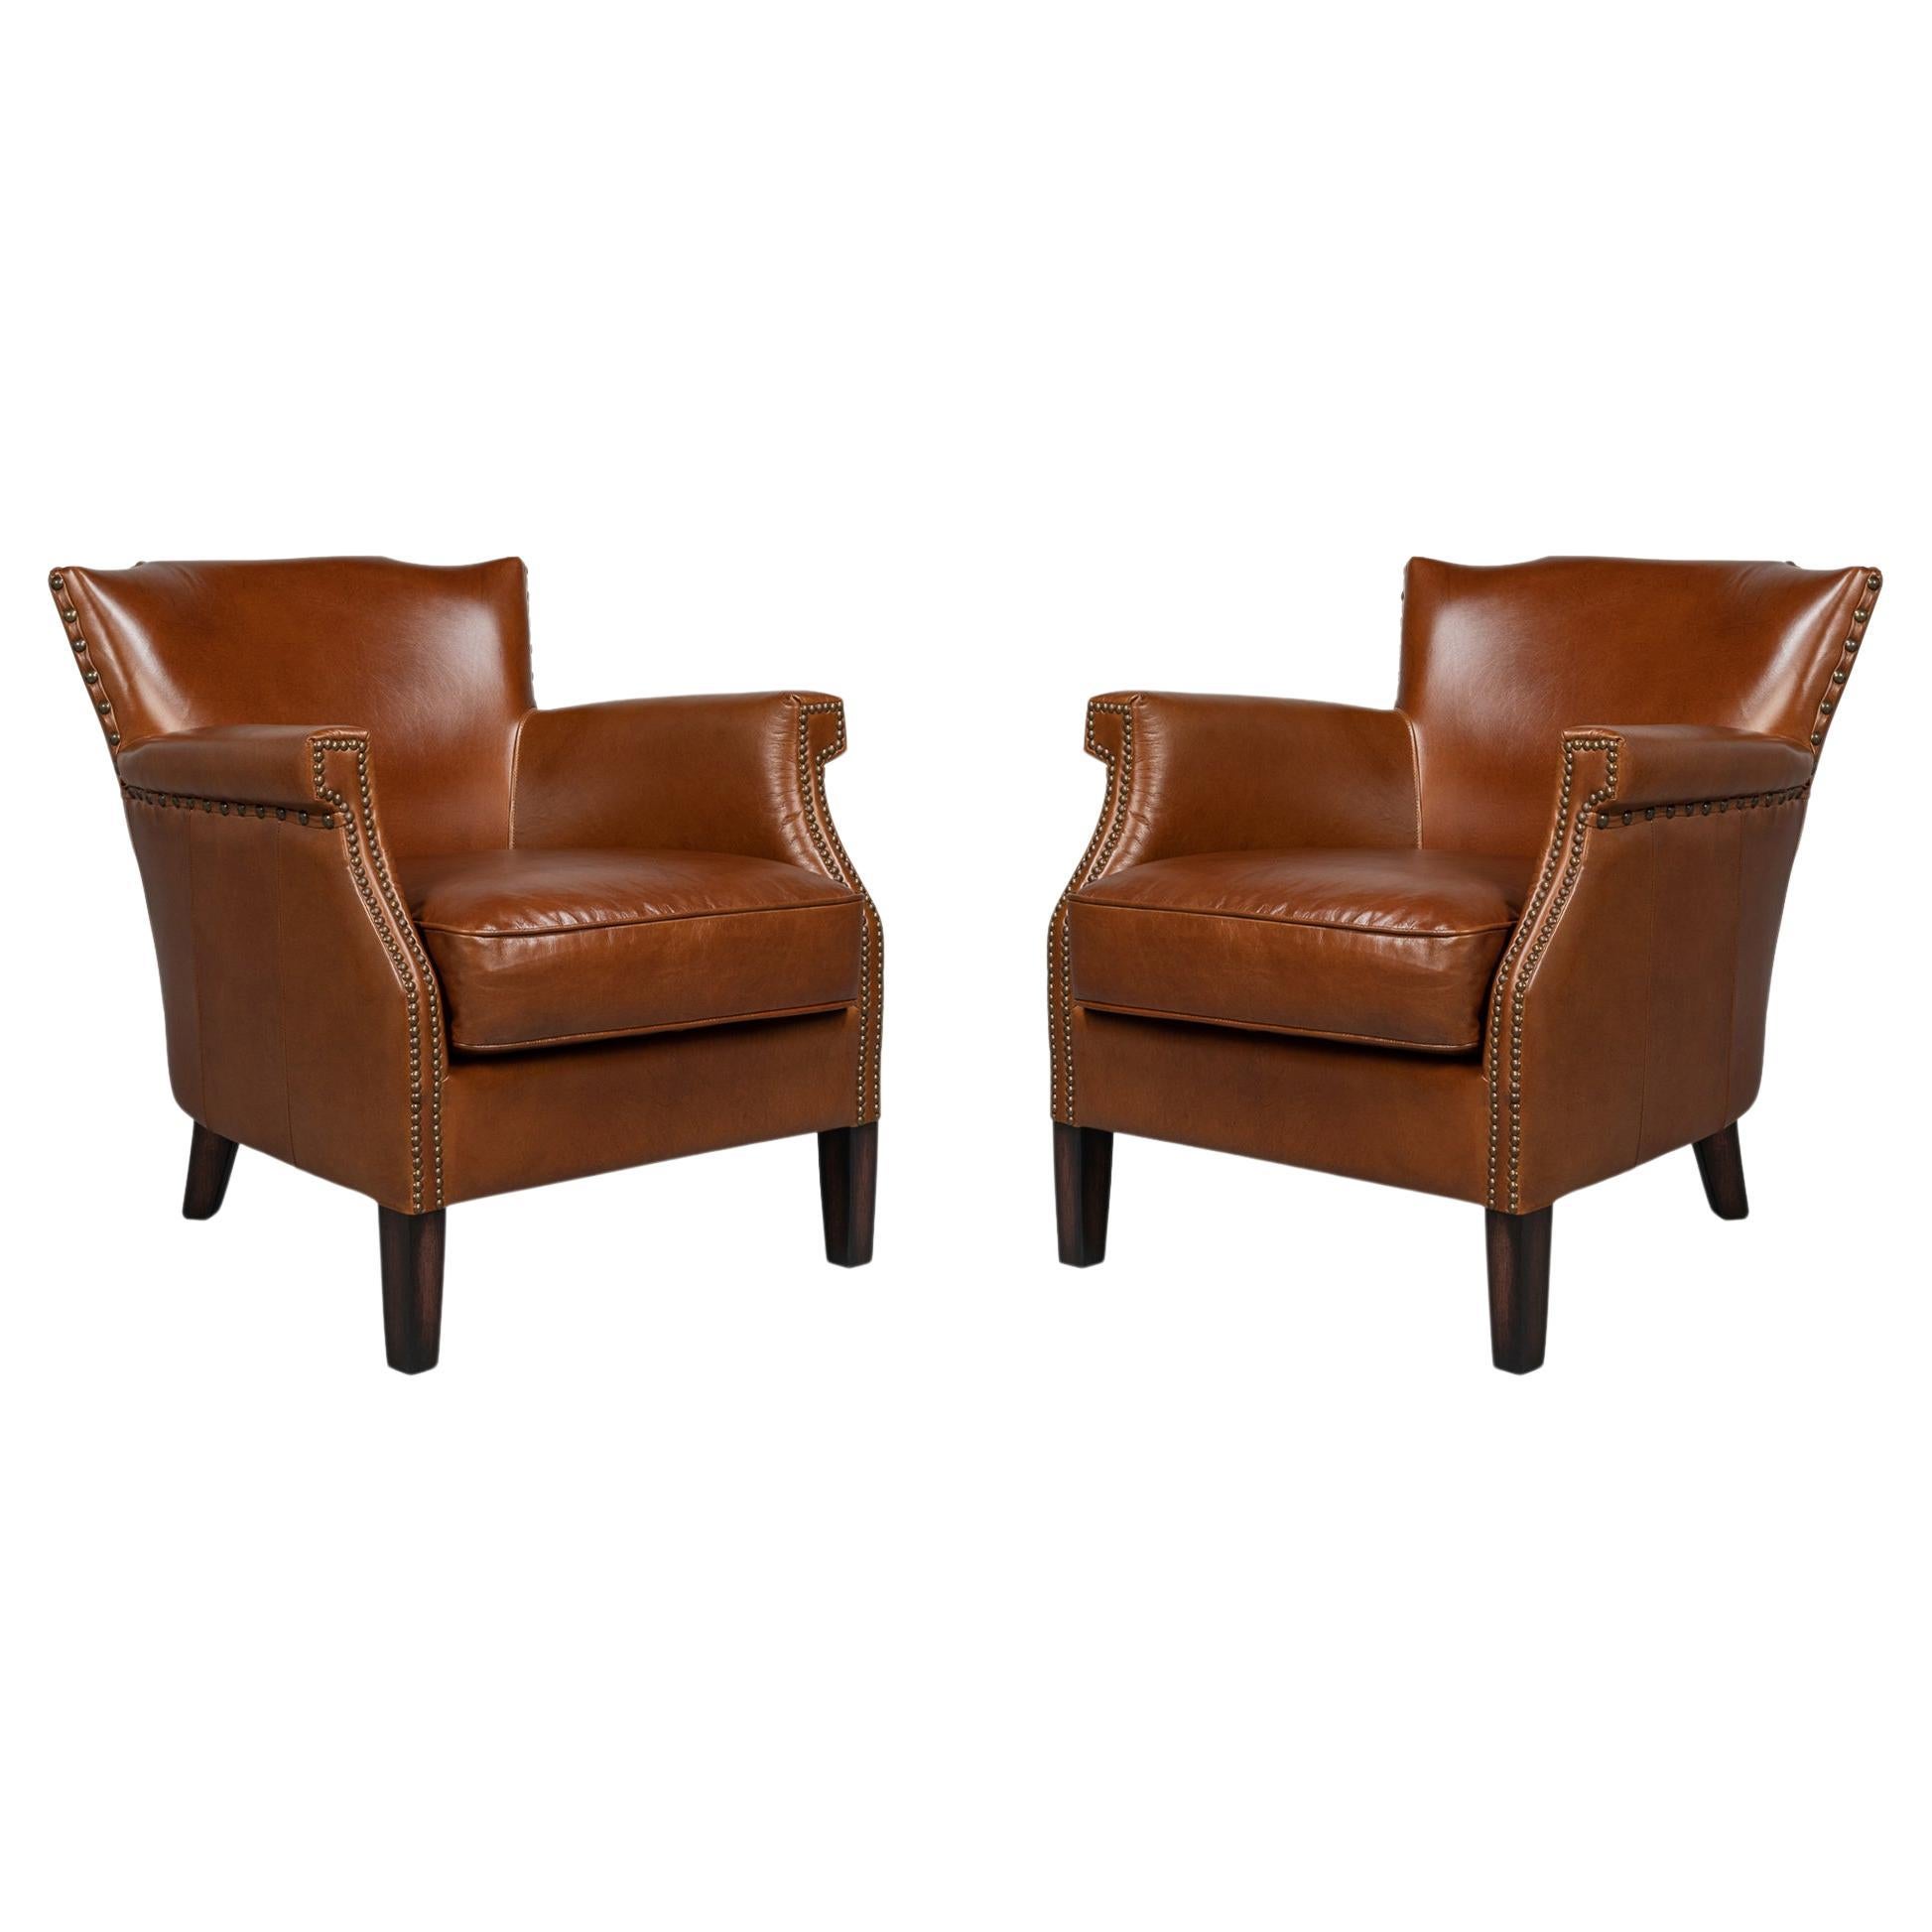 Pair of American West Leather Armchairs For Sale